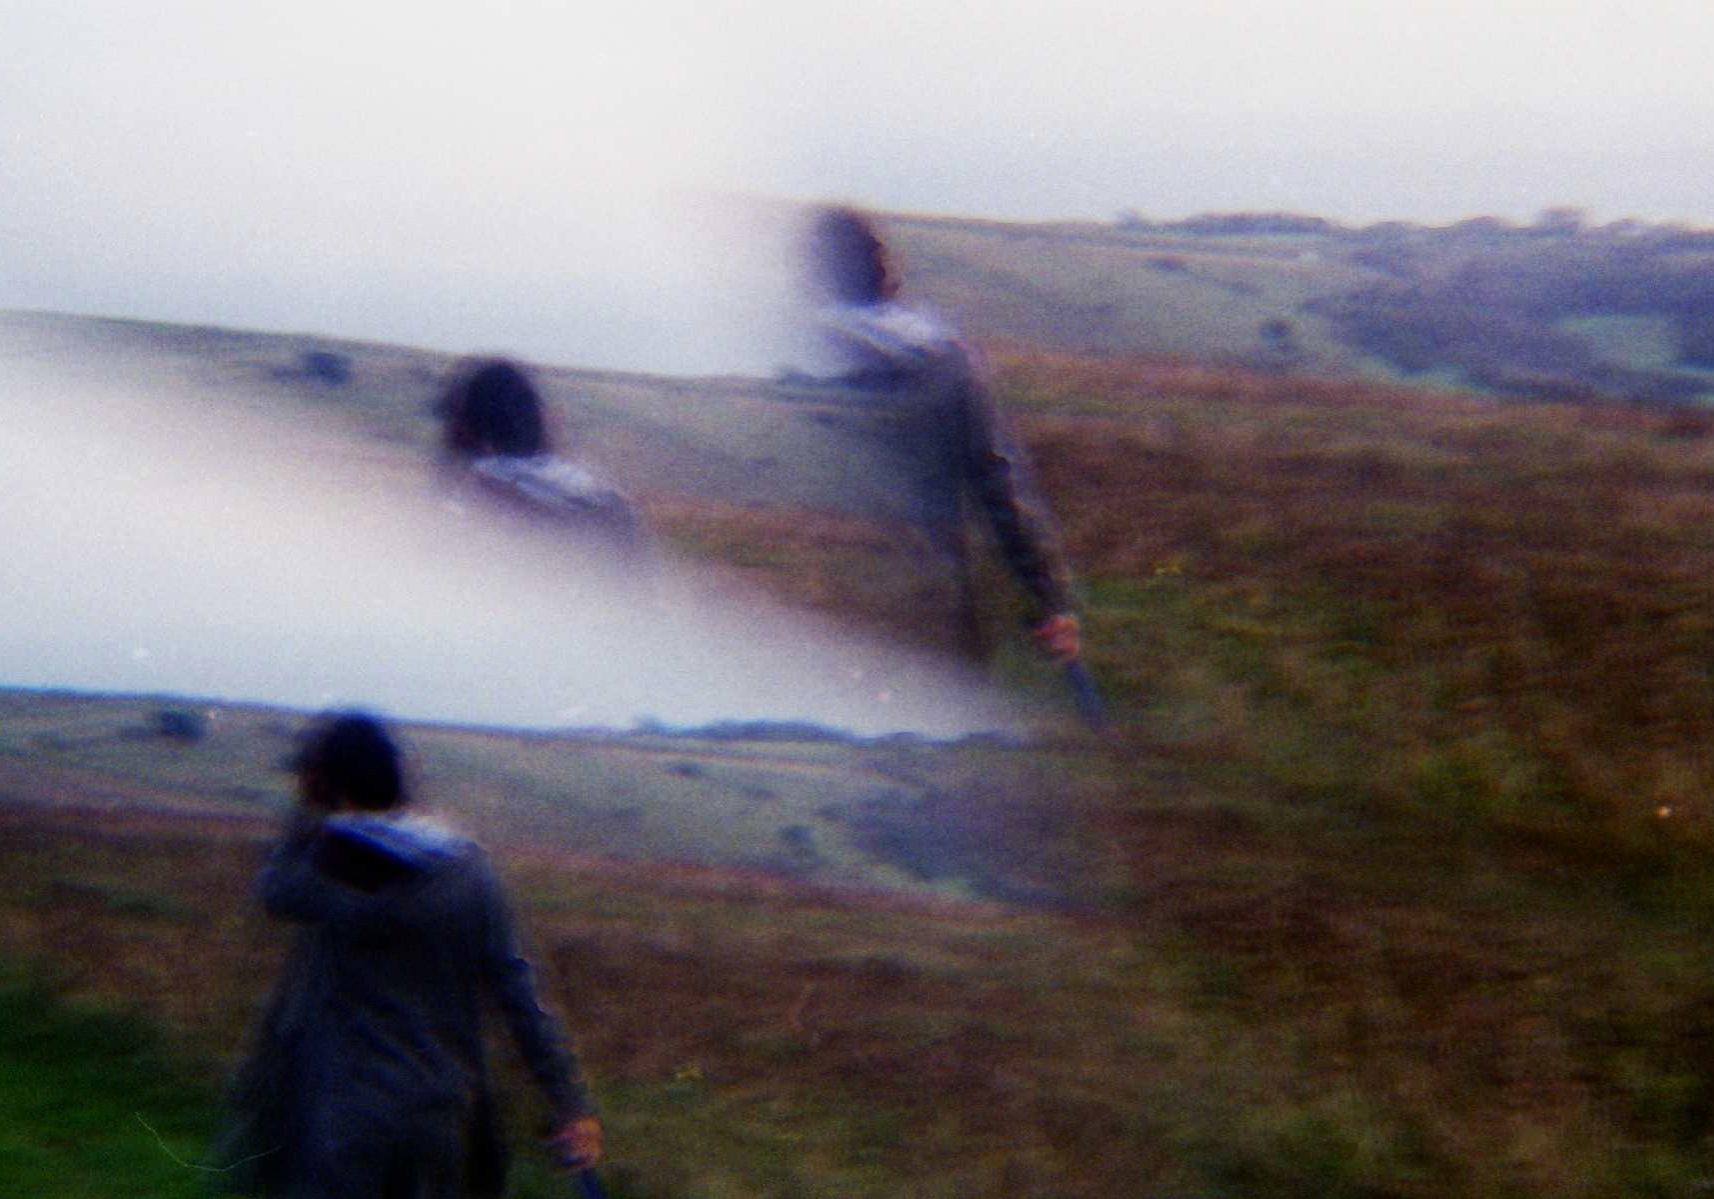 image of a woman with her back turned from the camera walking on a hill or cliff full of dry brown grass. the image has her overlaid a few times because of a film mistake.